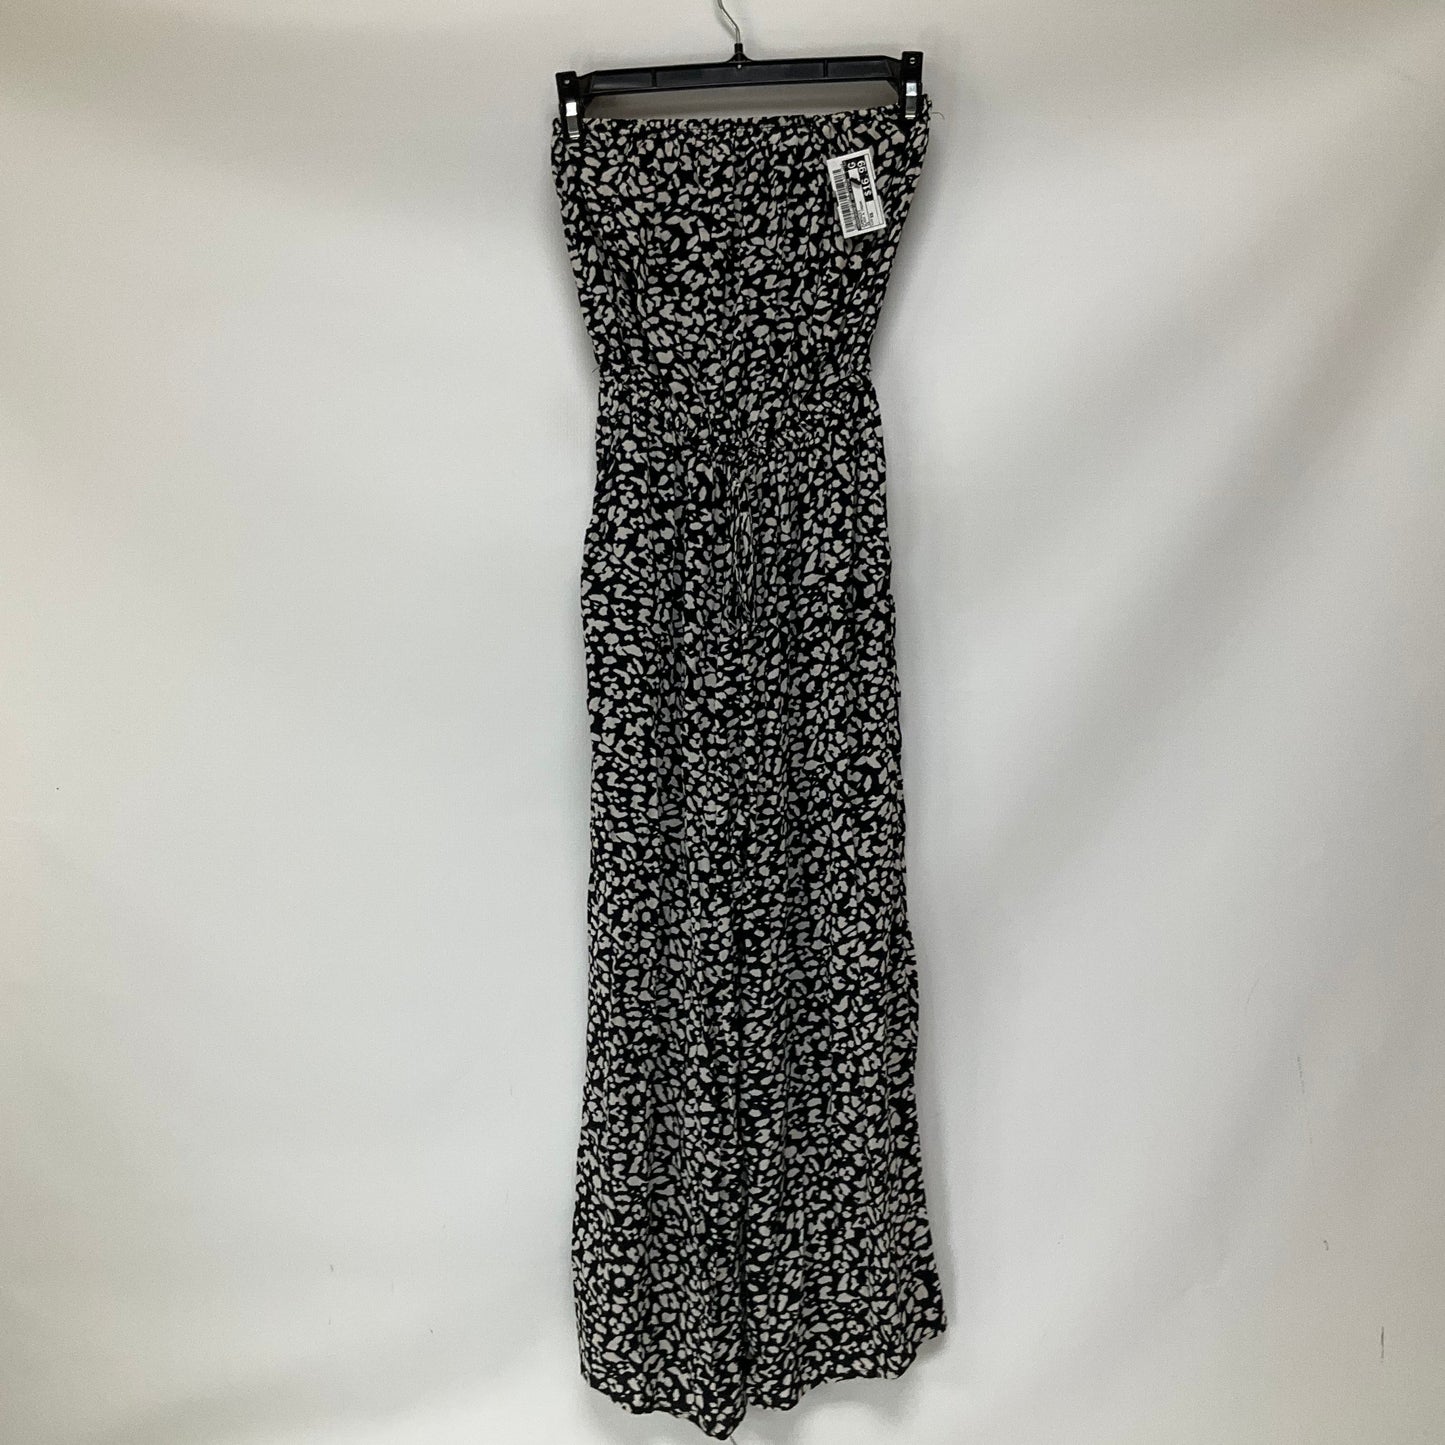 Black & Cream Jumpsuit Abercrombie And Fitch, Size Xs